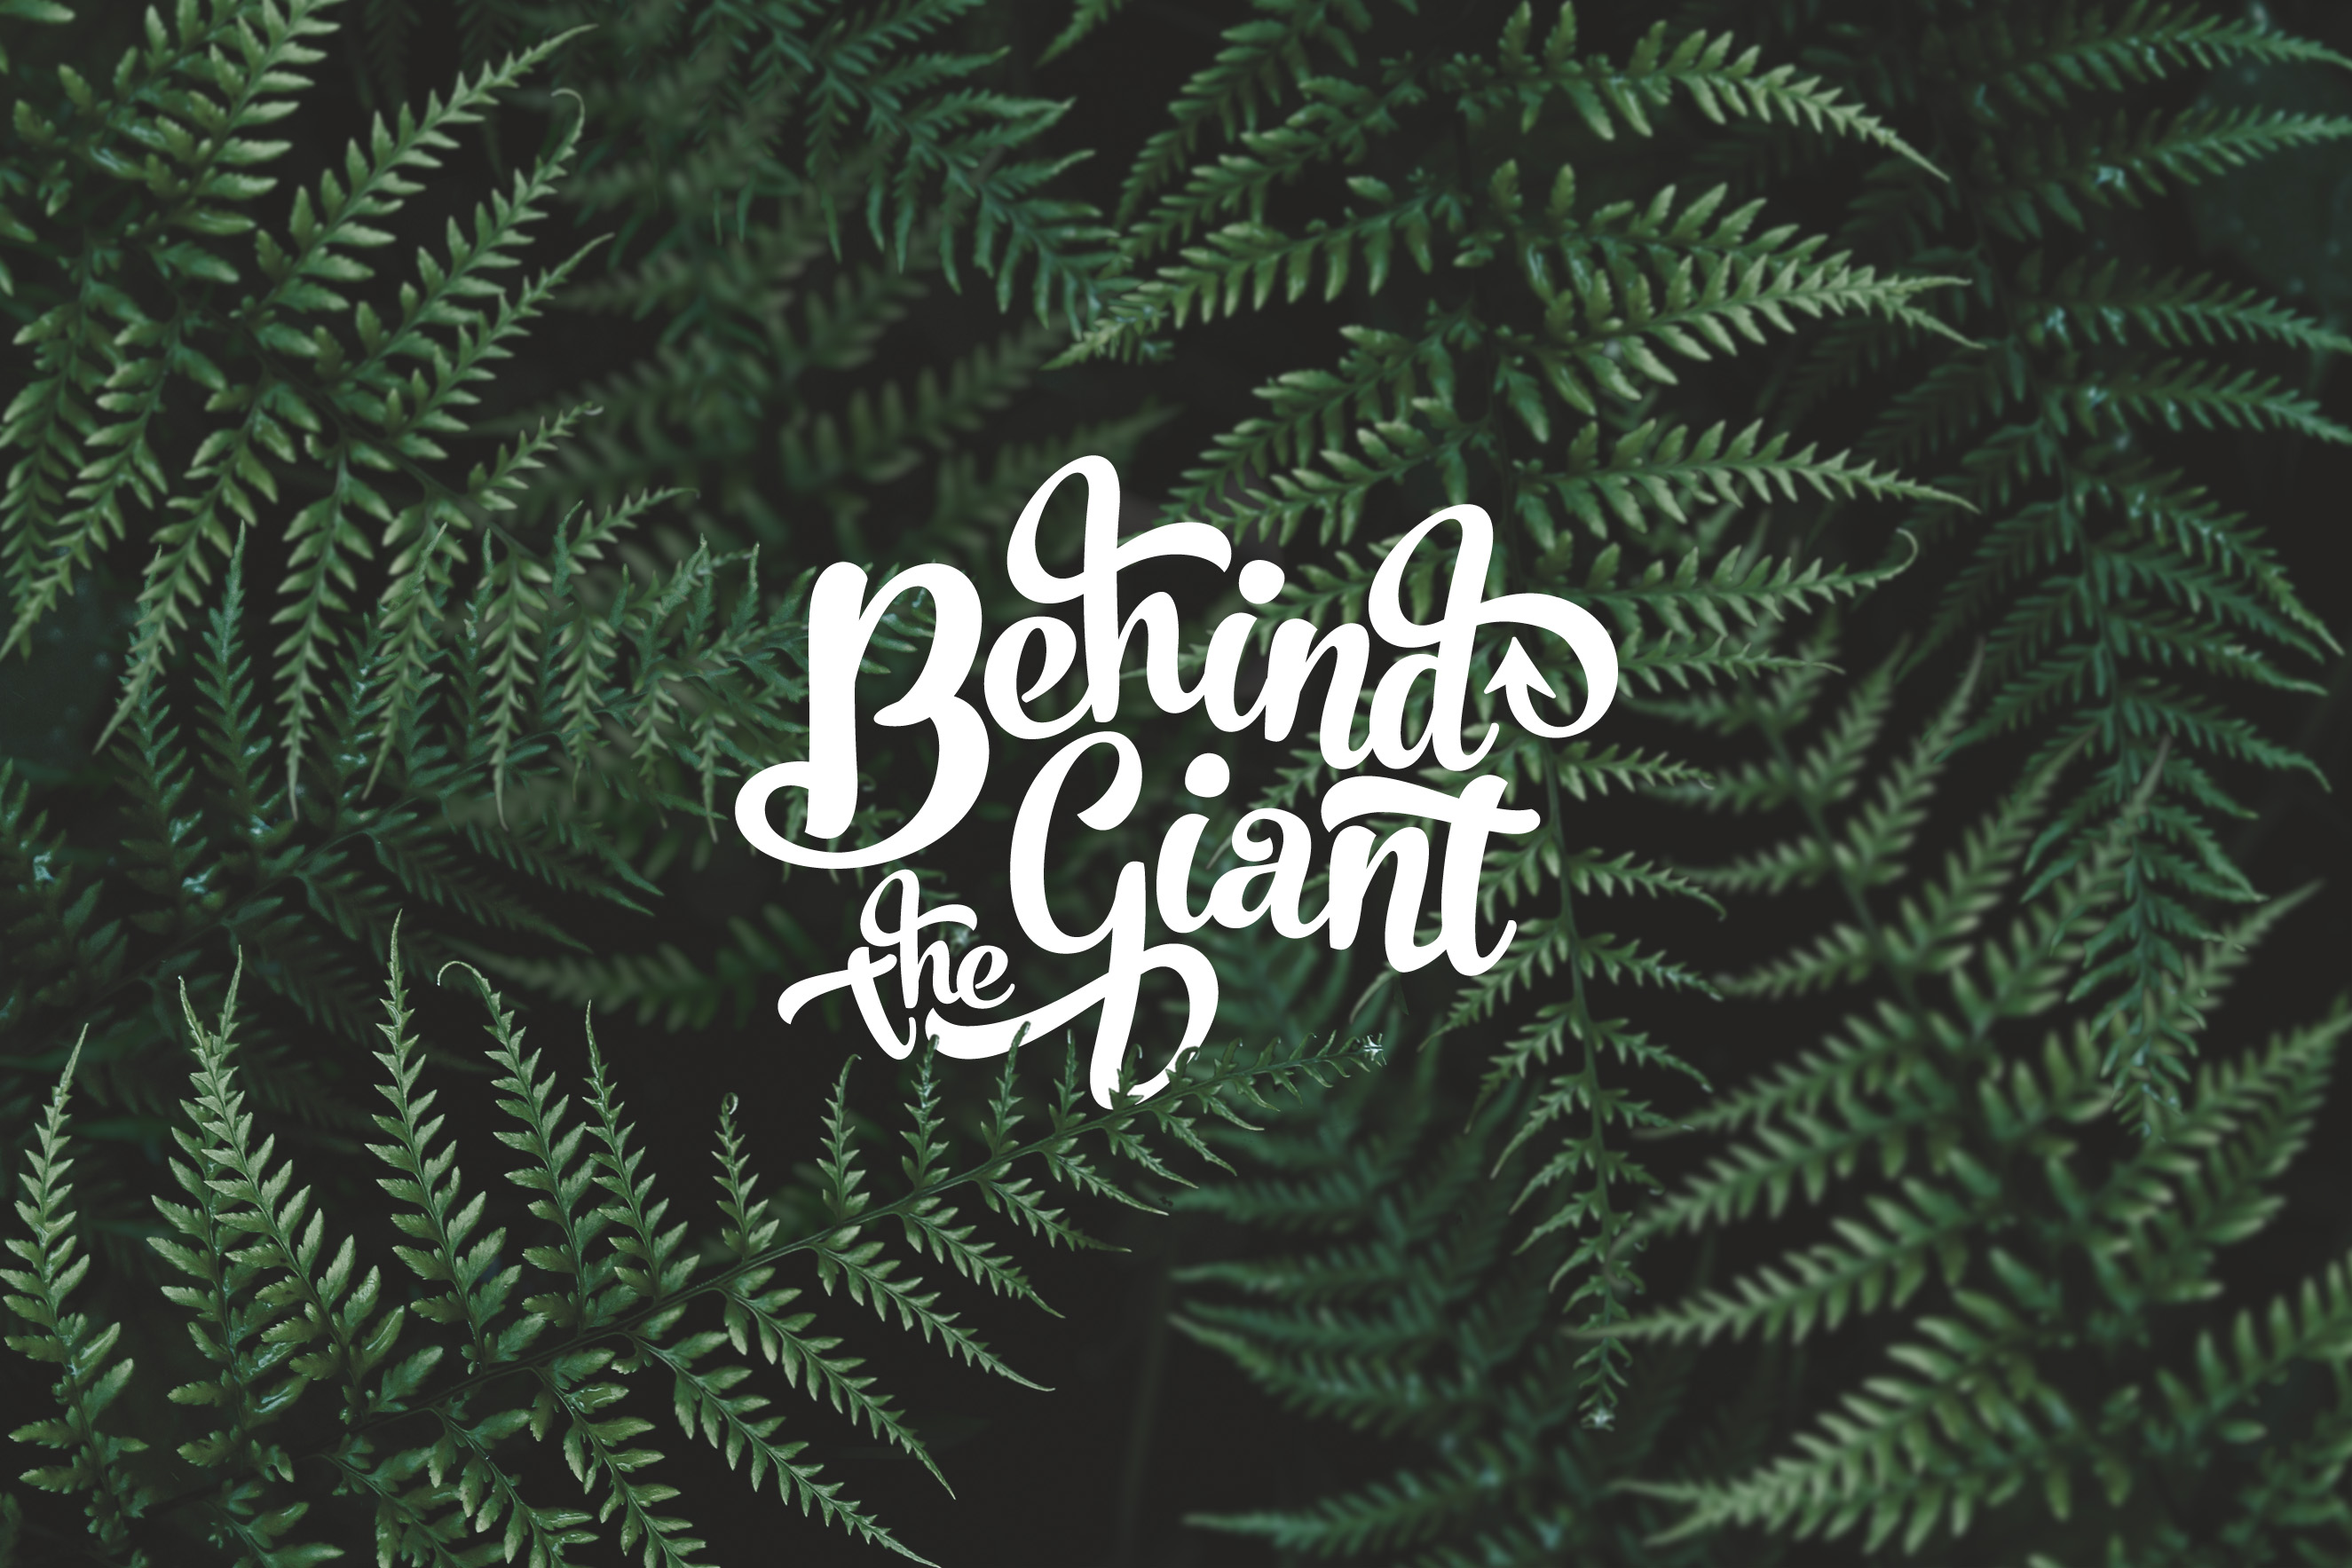 Behind the Giant